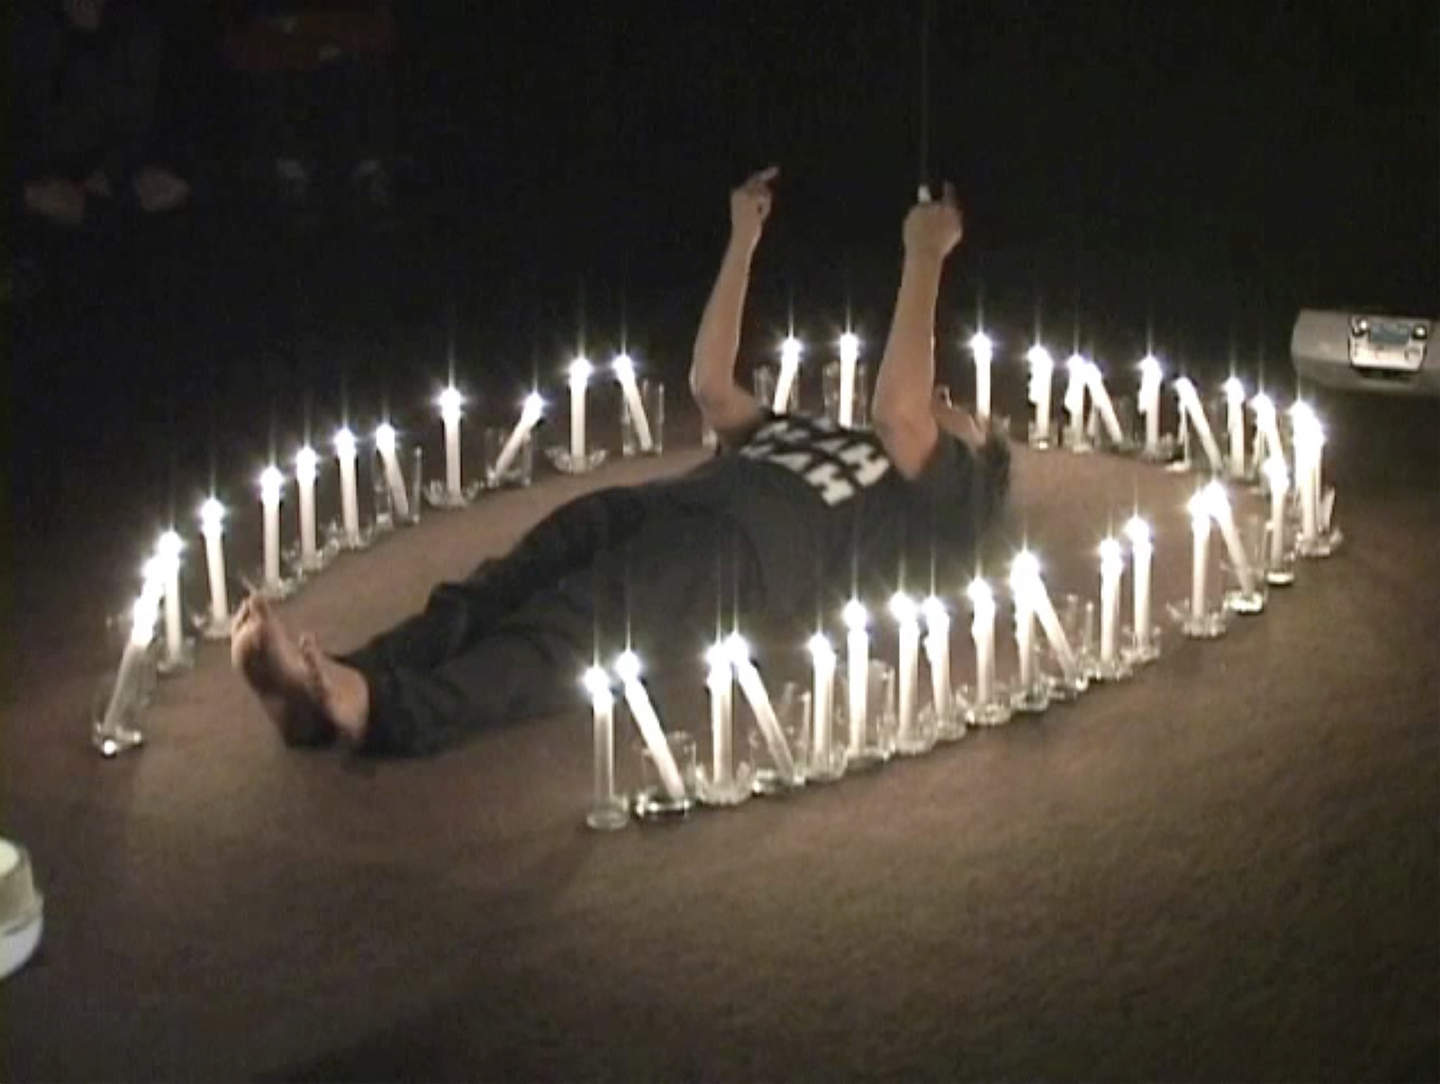 The artist Rebecca Belmore is dressed in black and lays on a carpeted floor with her arms in the air and her middle fingers raised. Surrounding her is an arch of lit candles. A silver boombox can be seen on the floor behind her.